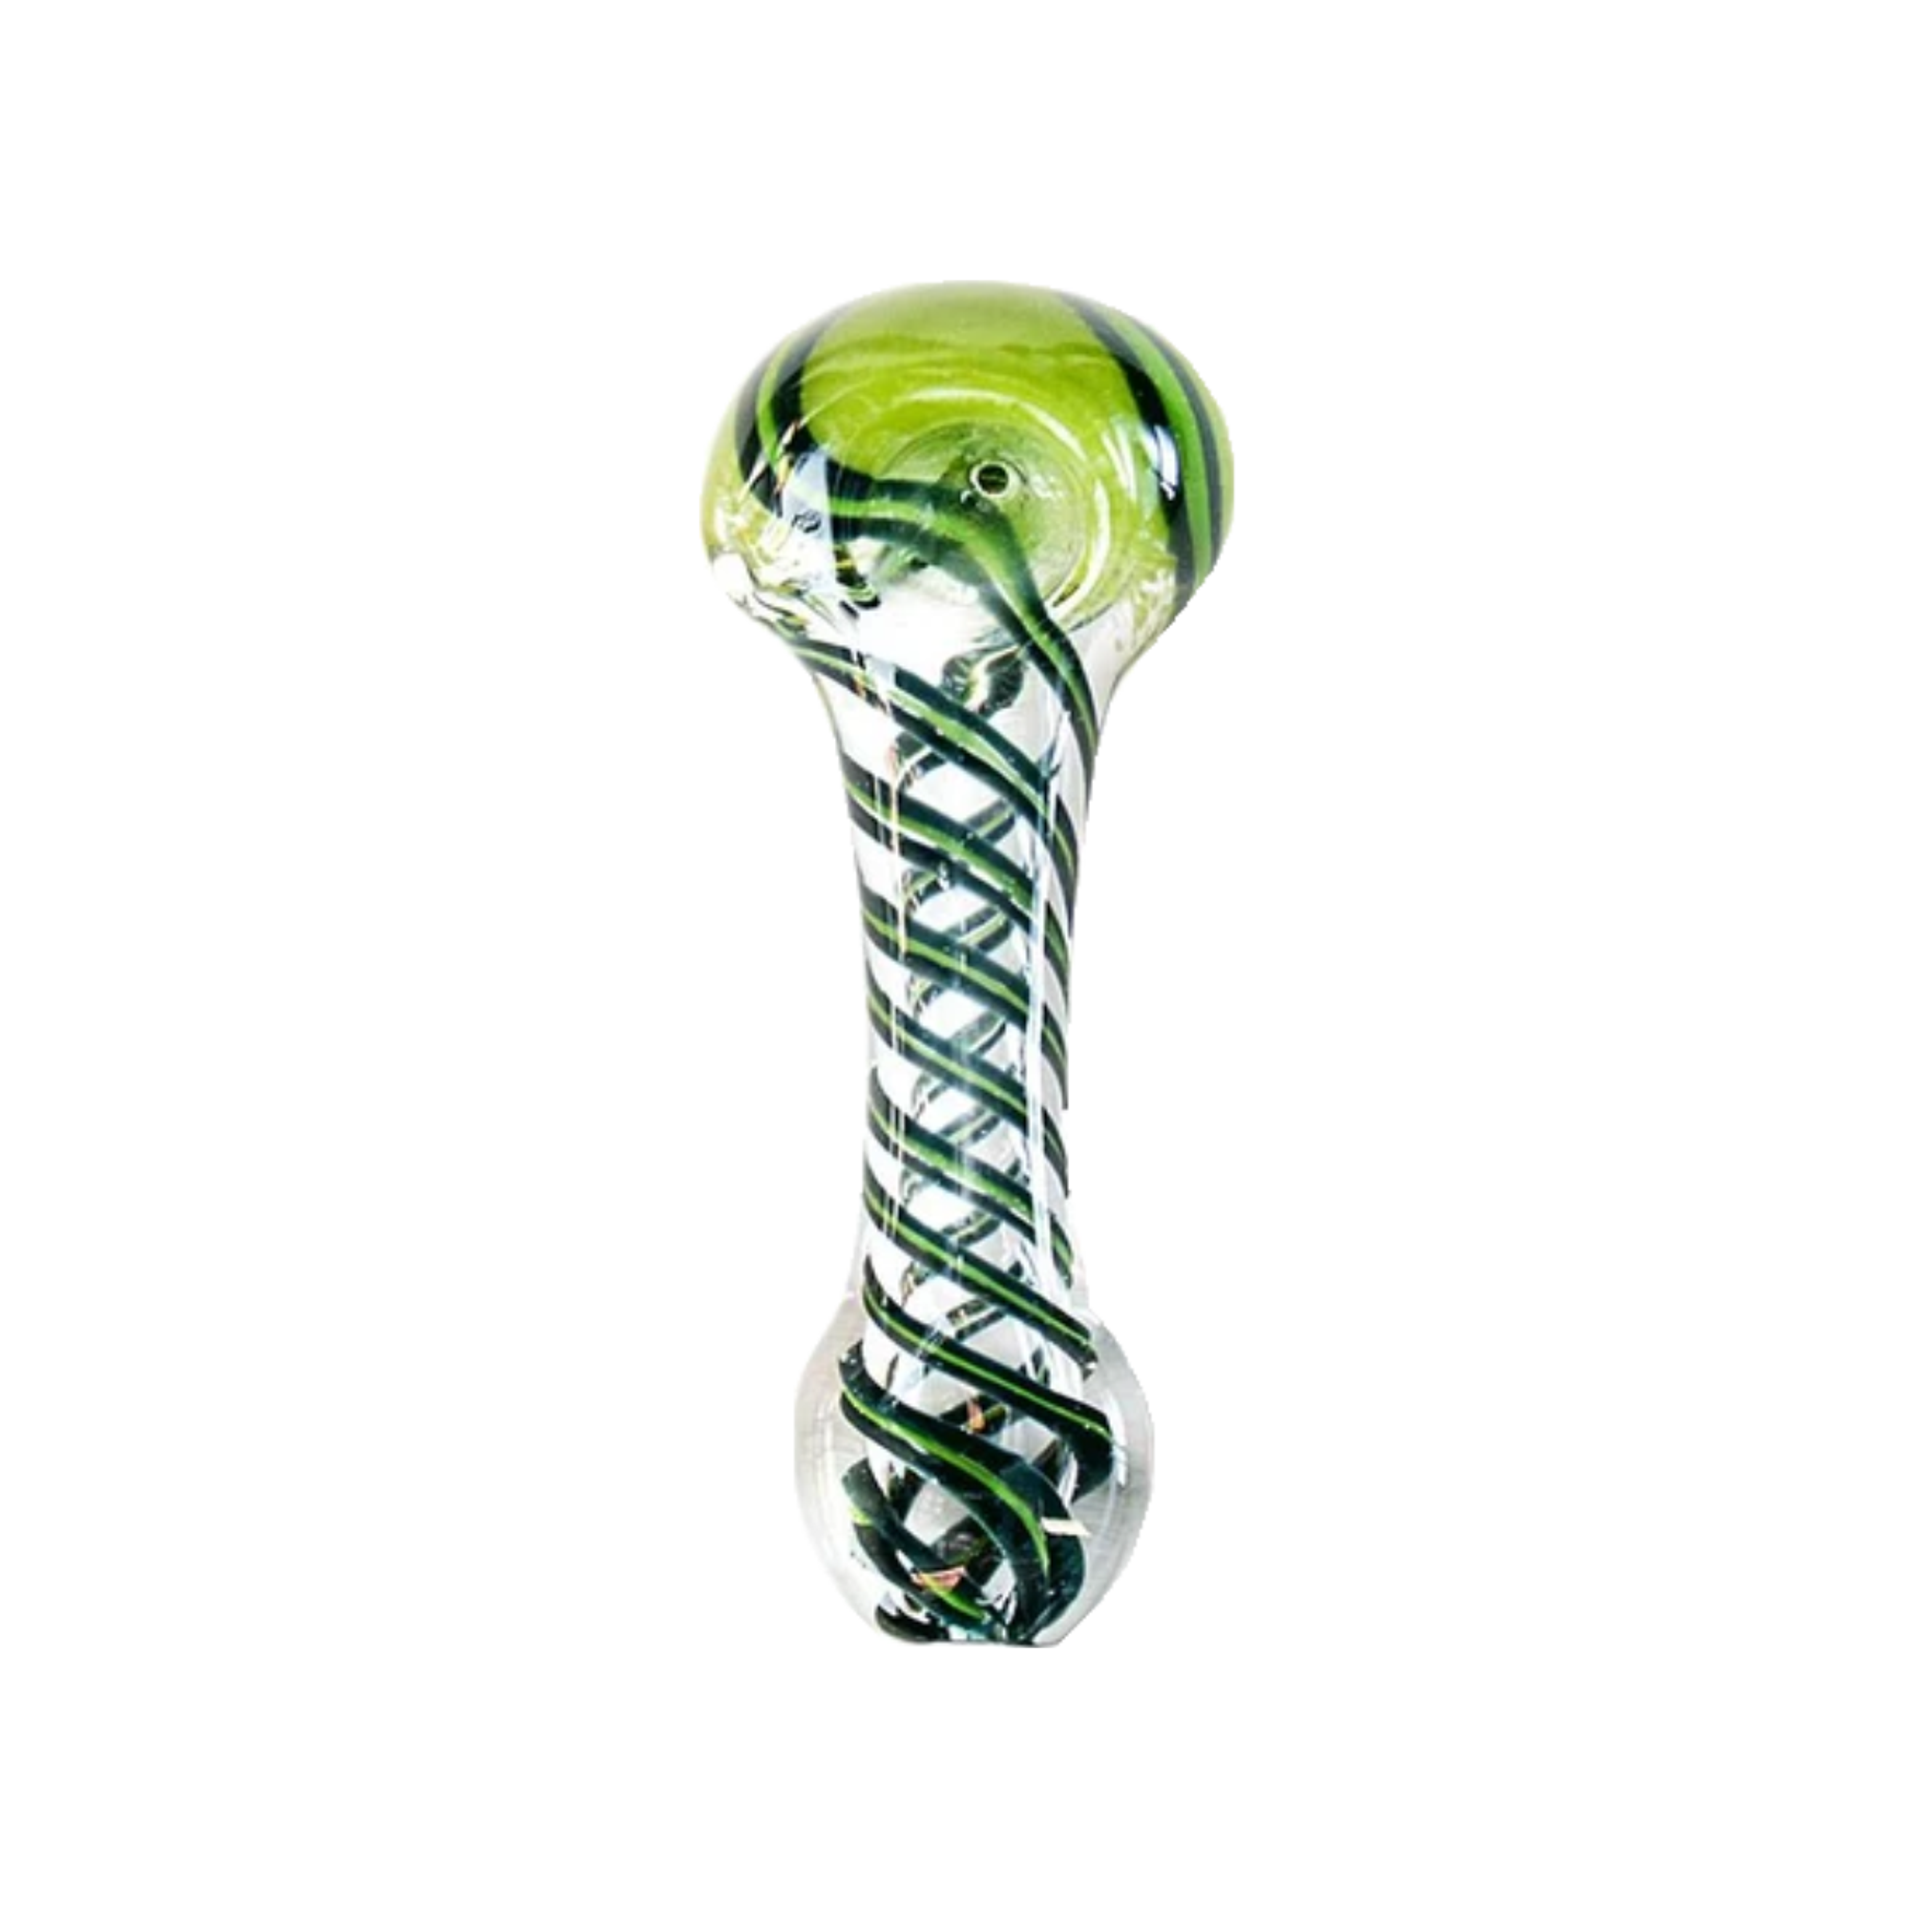 4.5" Frit Head Spiral Hand Pipe, 1 of 1